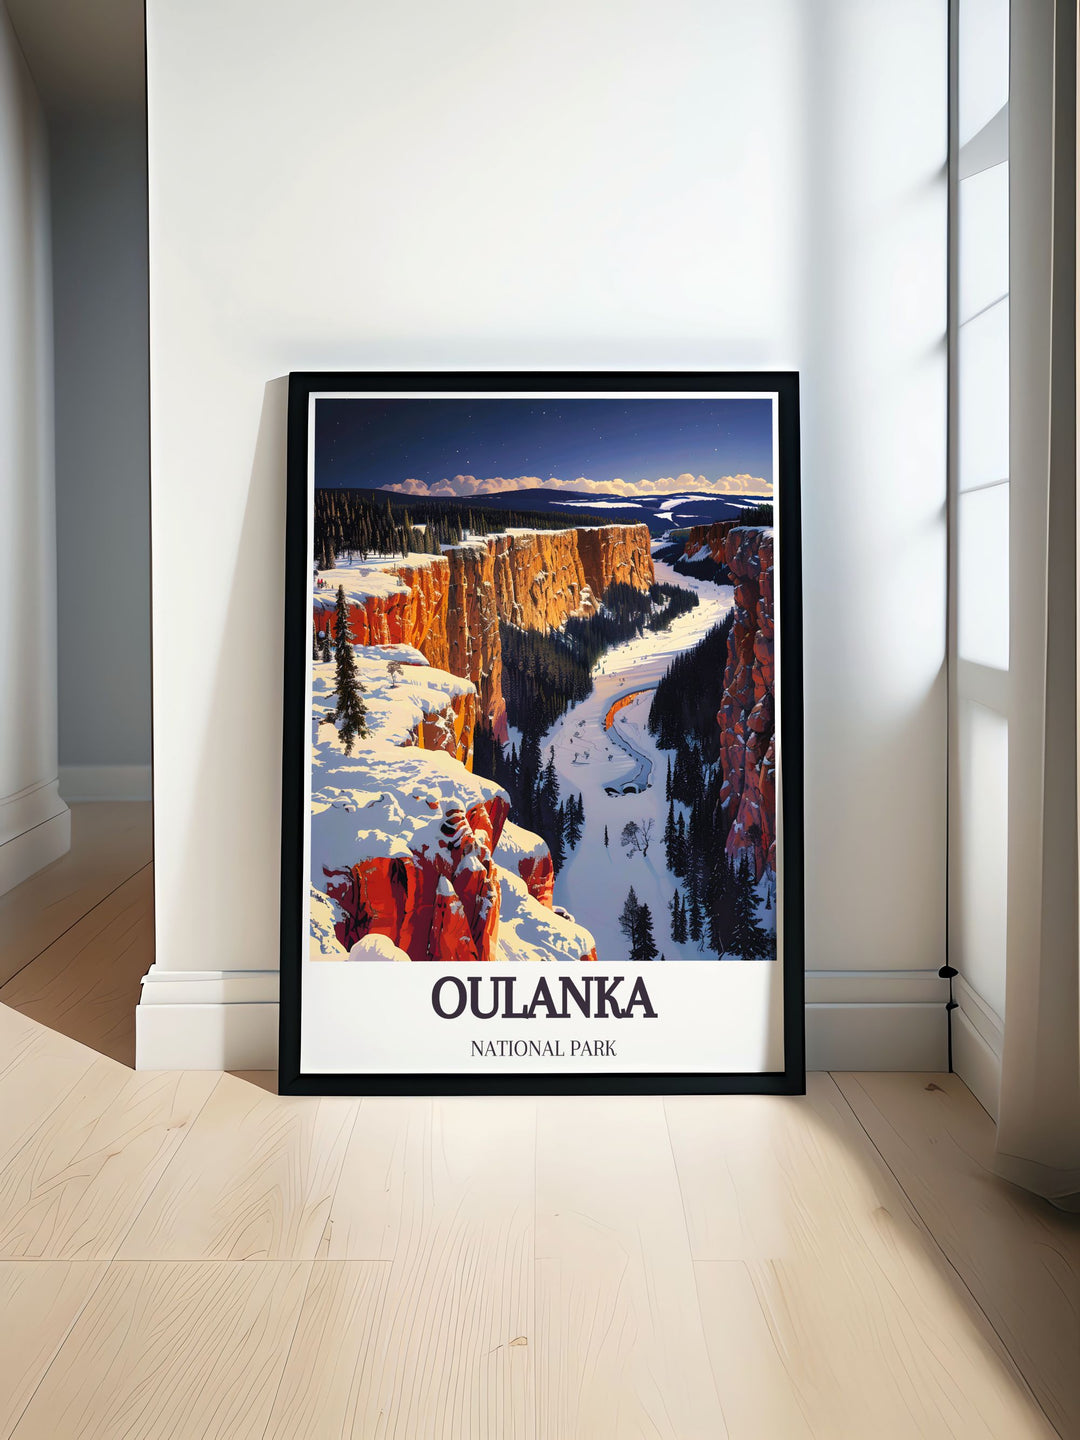 Finland Travel Print featuring Ristikallio Cliffs in Oulanka National Park capturing the vibrant colors and natural beauty of the cliffs perfect for nature enthusiasts and adventurers looking to bring a piece of Scandinavian wilderness into their home decor